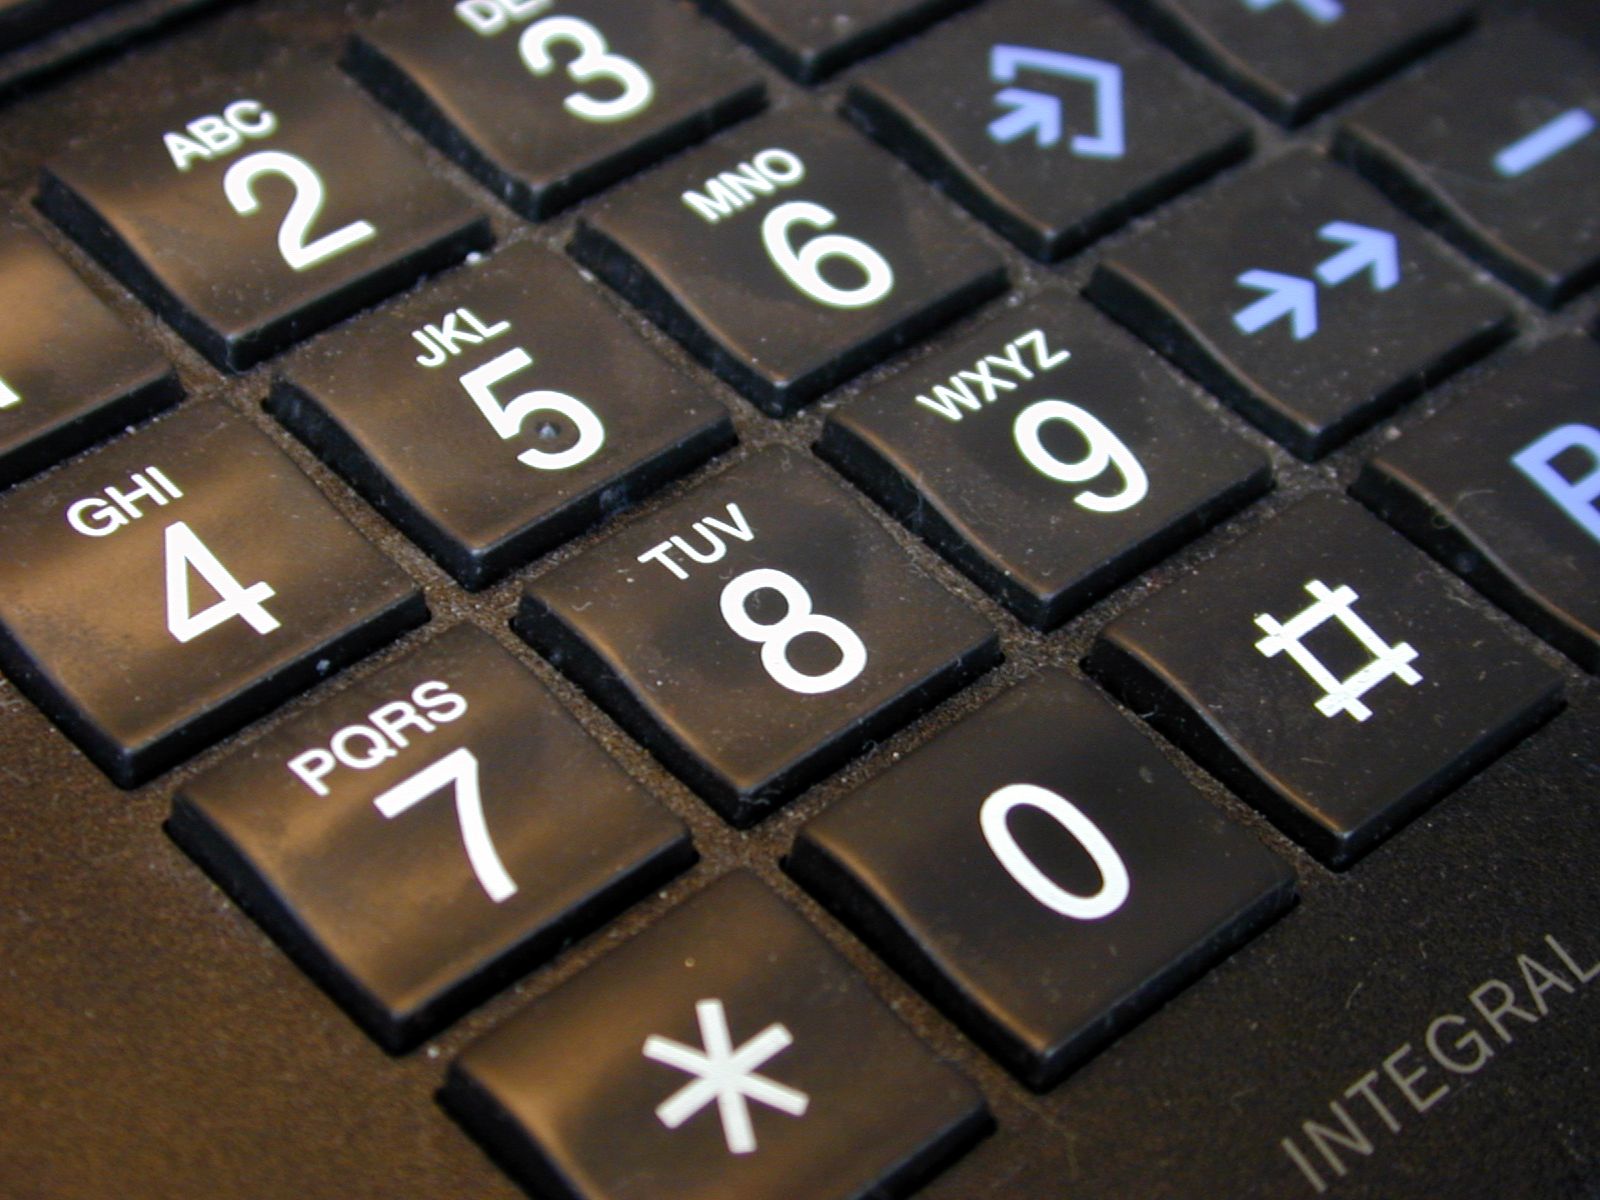 keyboard numbers button number button black and white key keys phone dialing free